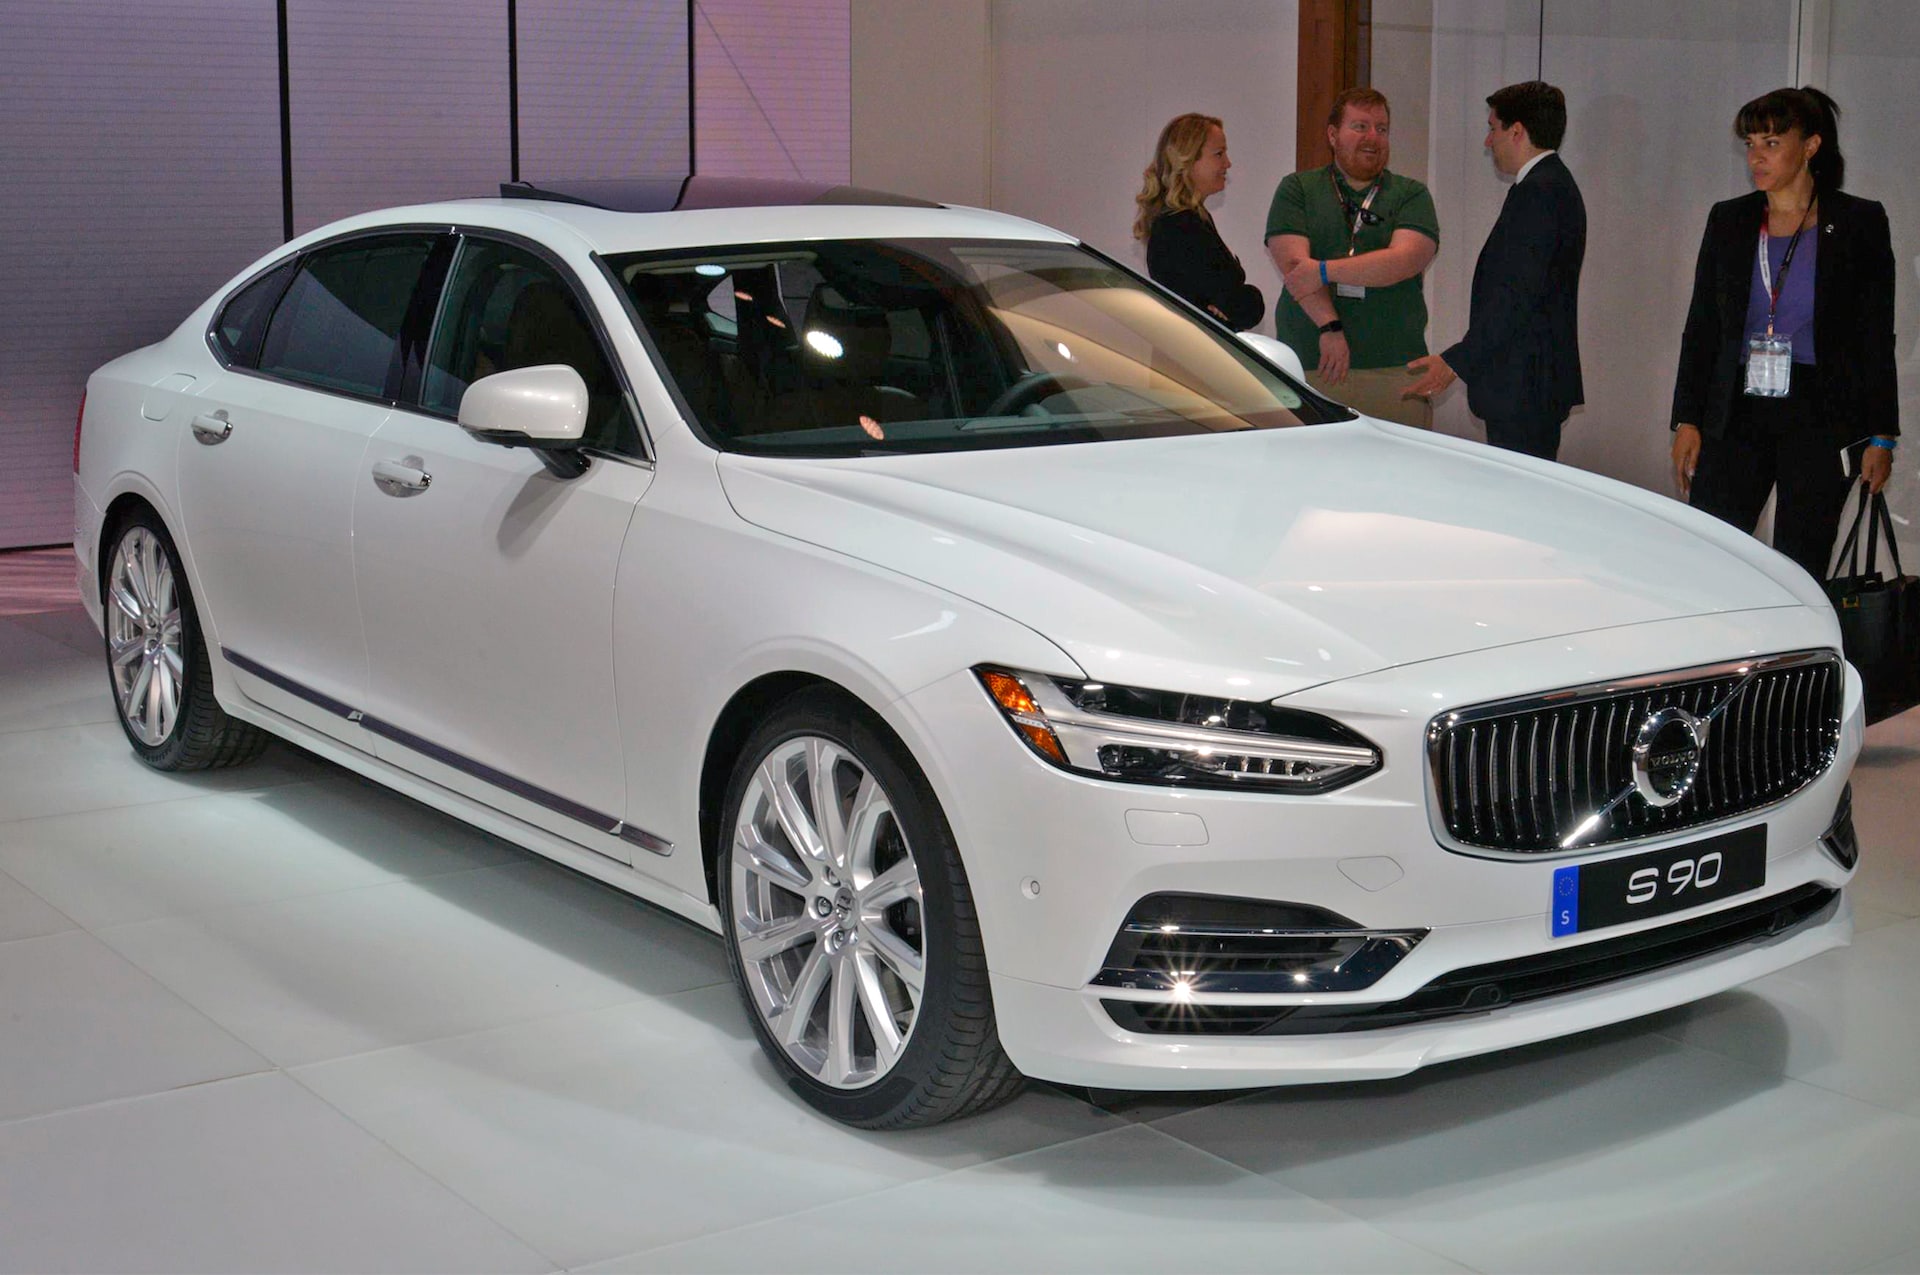 2018 Volvo S90 First Look: Stretched Swede (Mostly)